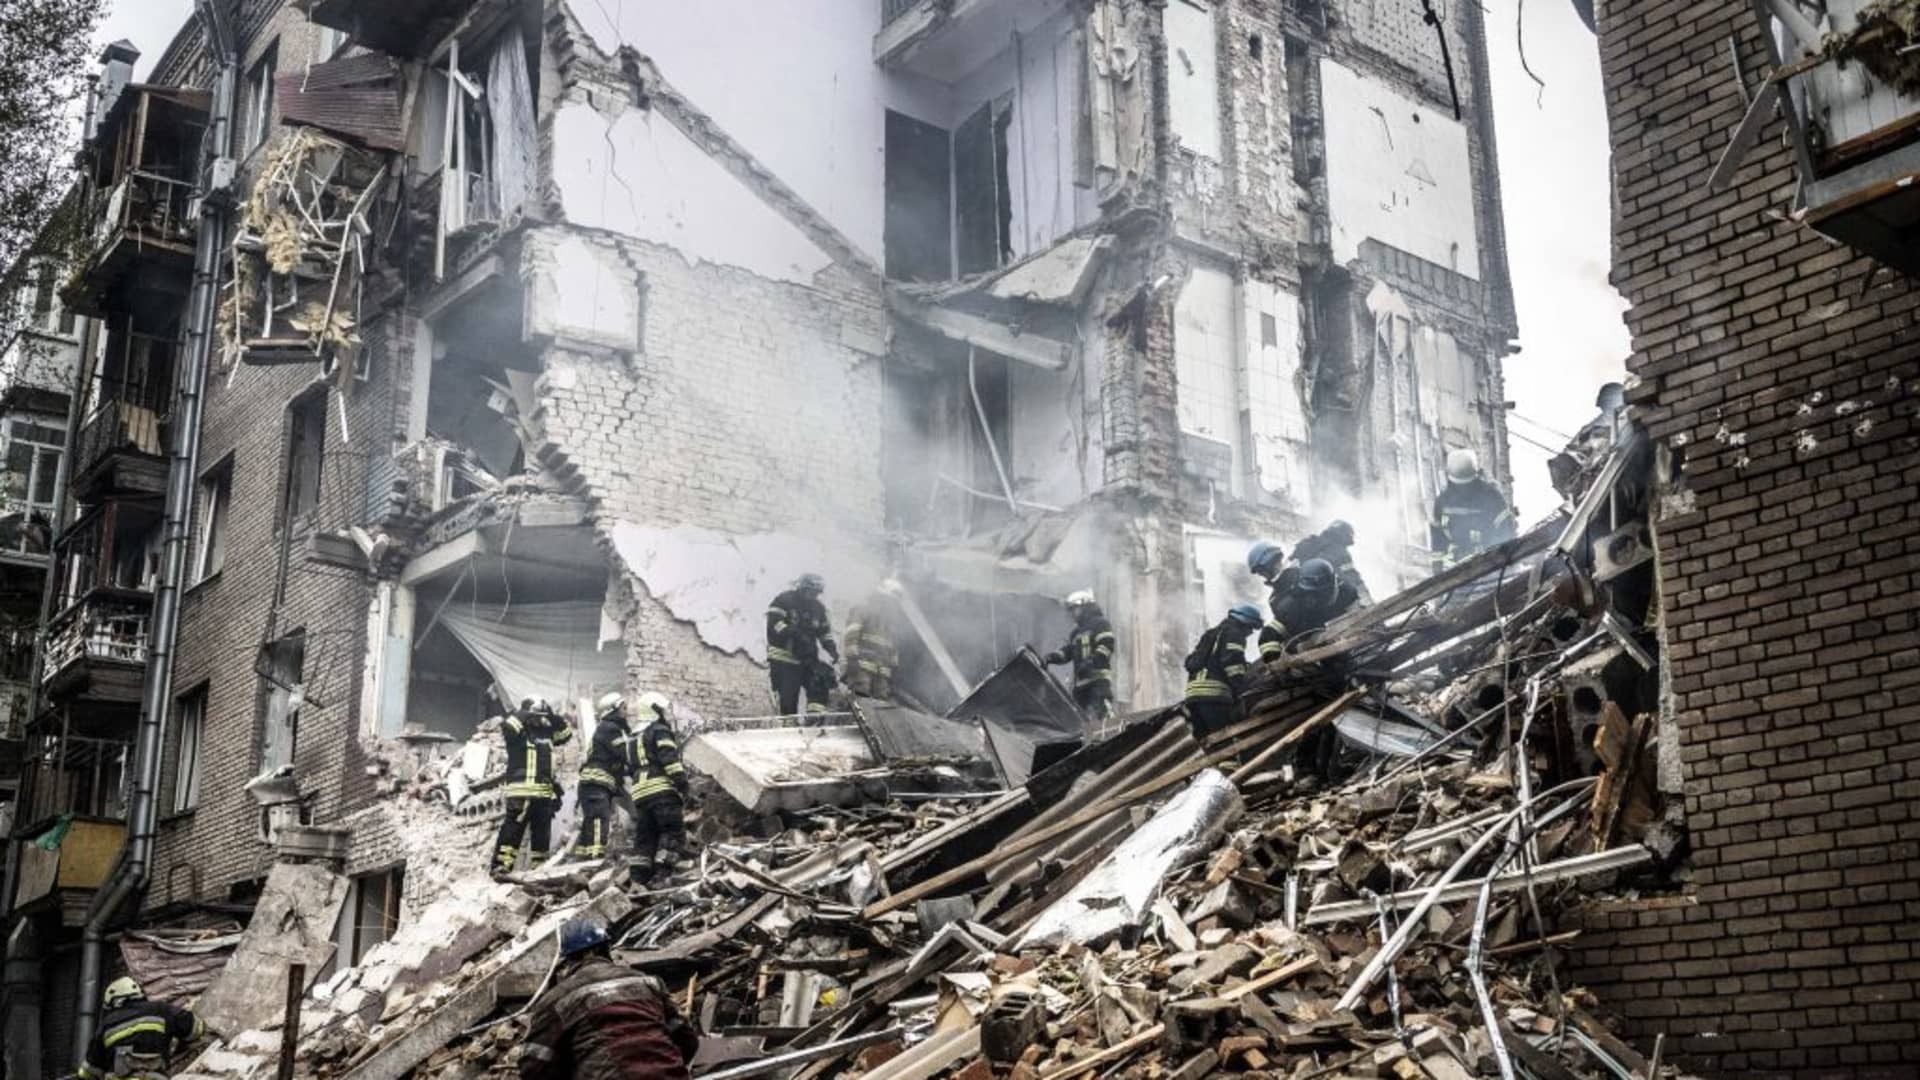 Firefighters in a damaged building after a Russian missile attack in Zaporizhzhia, Ukraine, on Oct. 10, 2022.